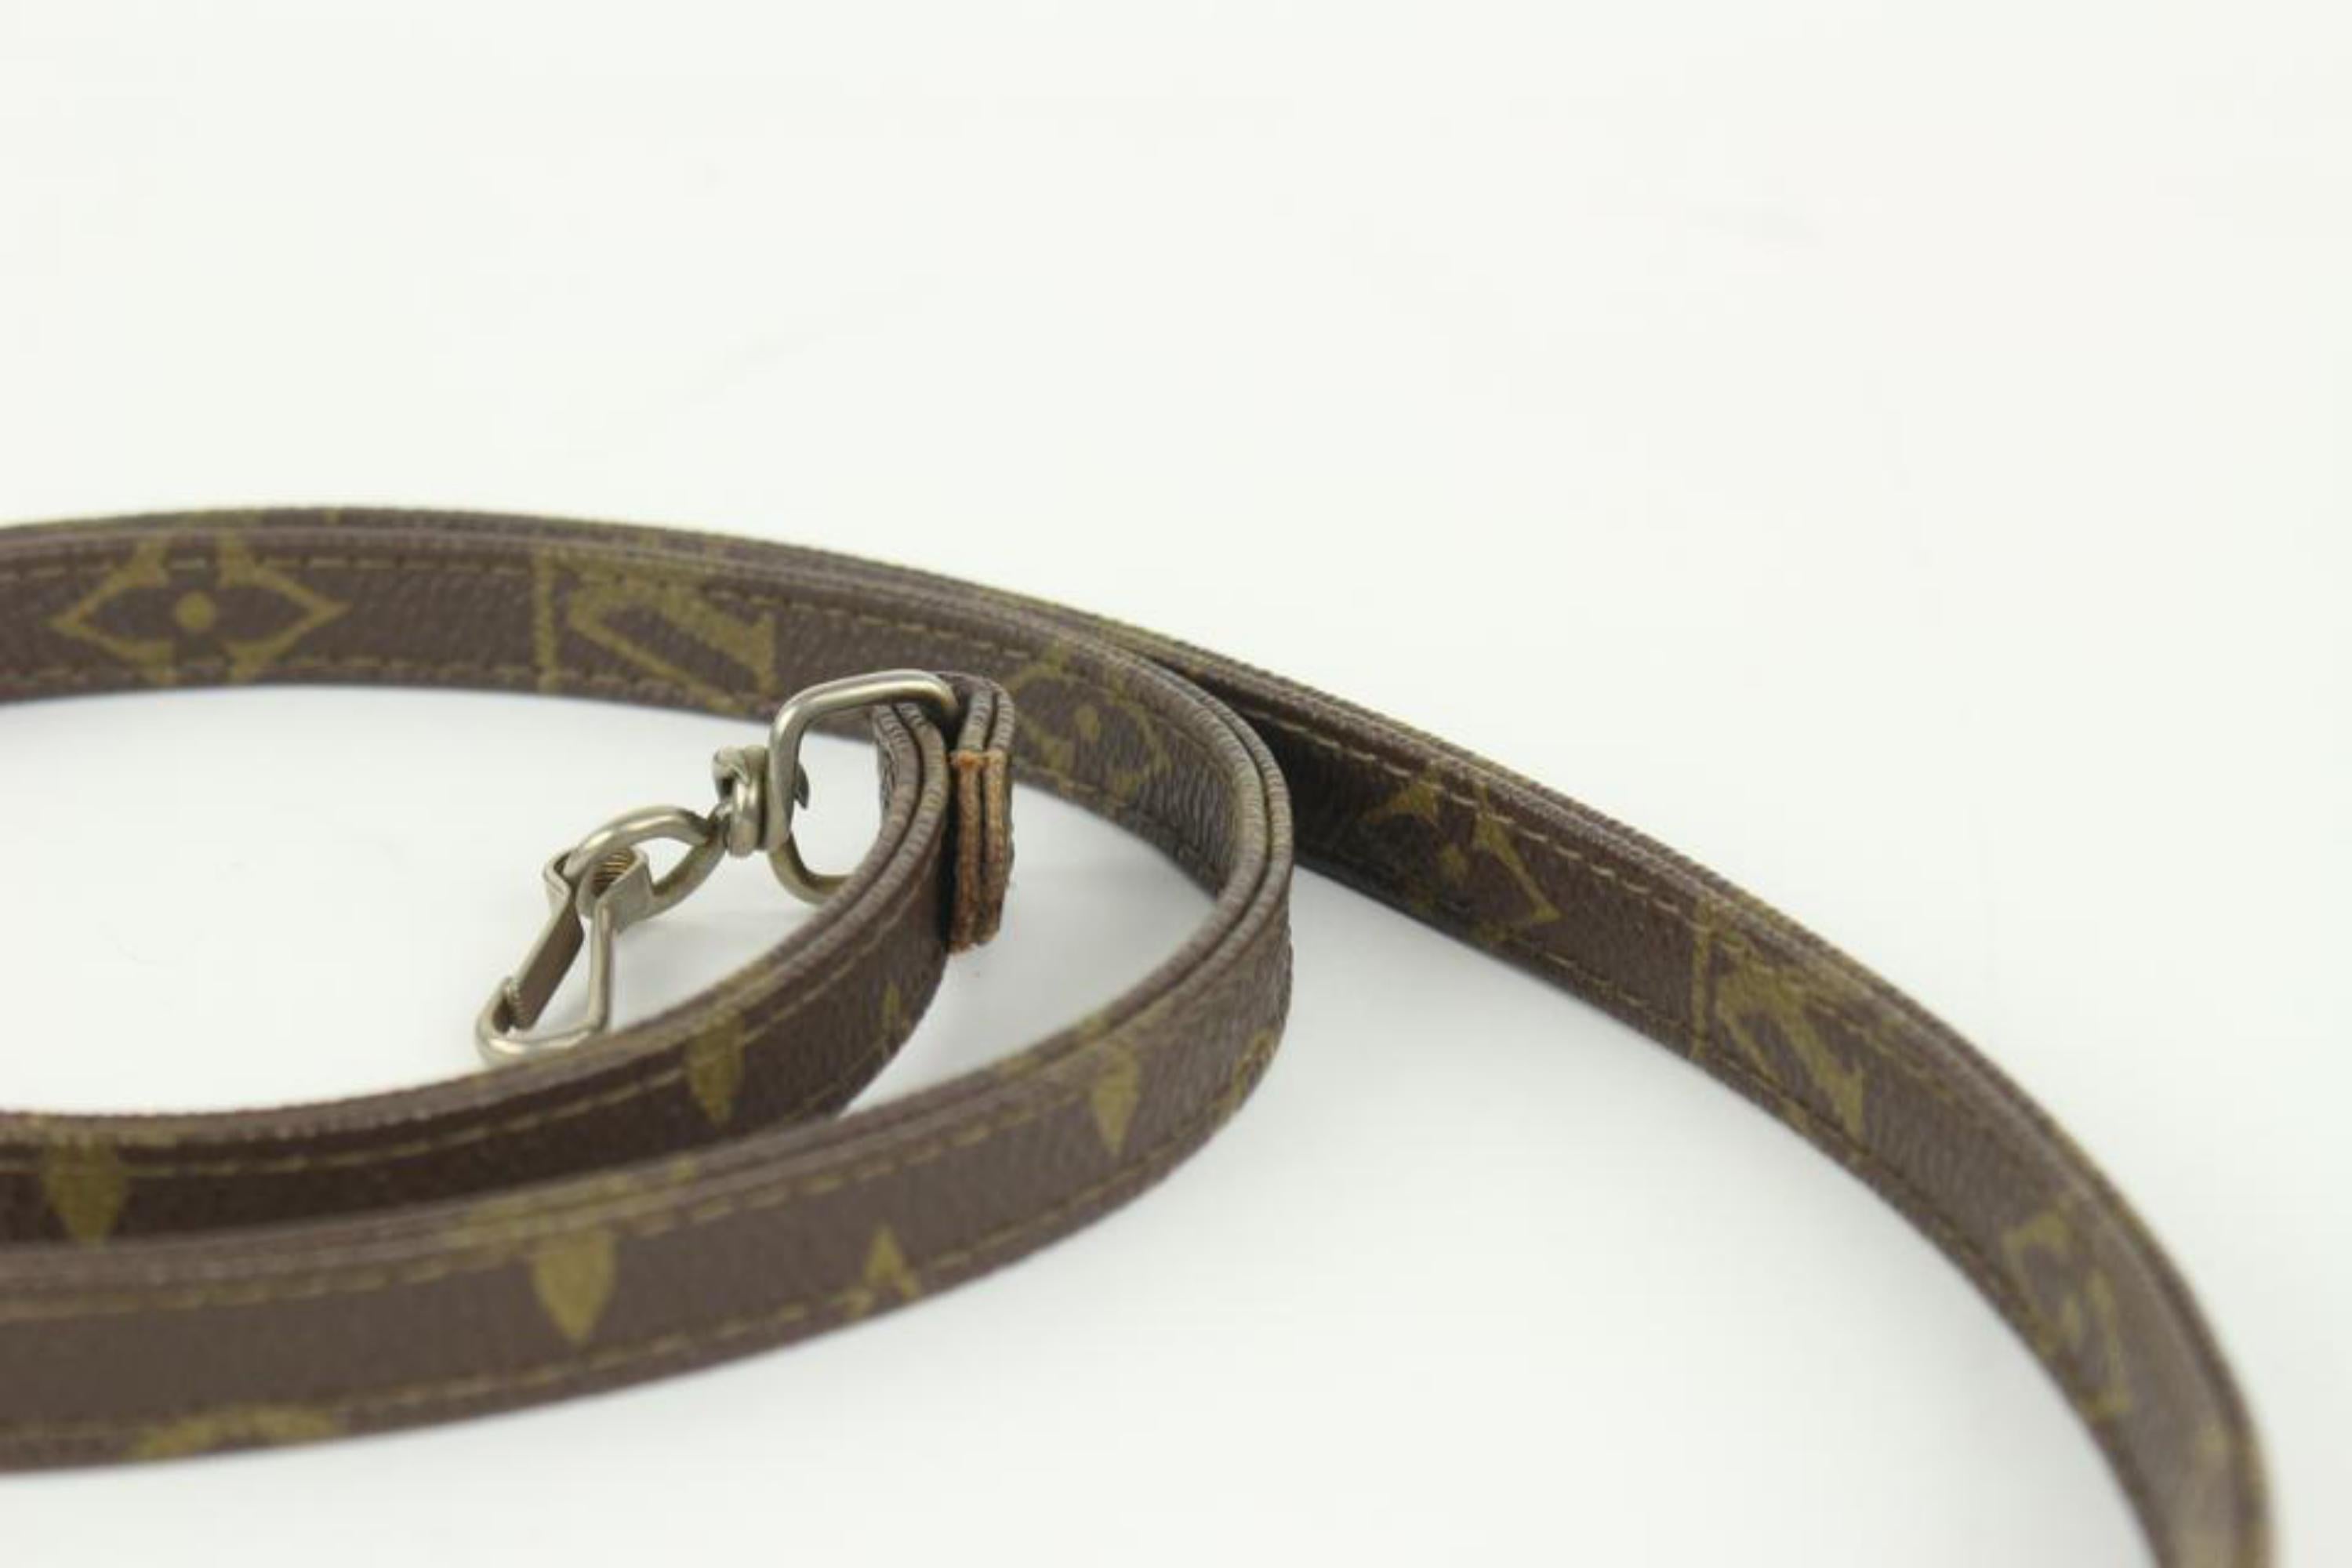 Louis Vuitton 41 Inch Monogram Bandouliere Shoulder Strap 5LVN1025 In Good Condition For Sale In Dix hills, NY